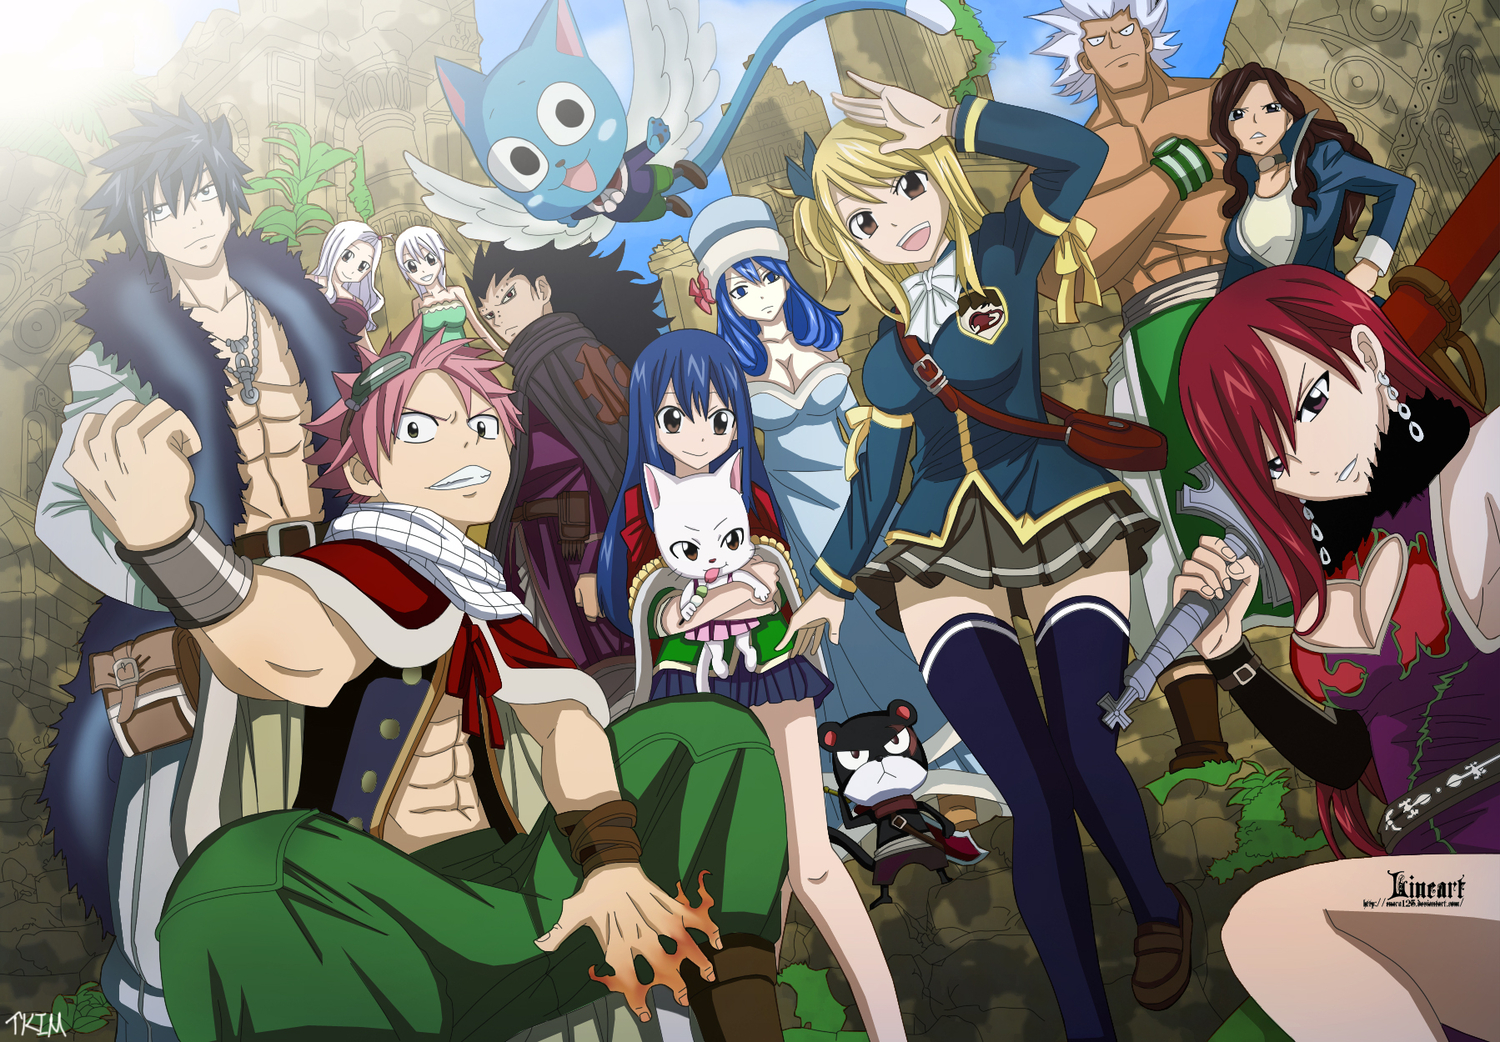 Fairy Tail Wallpaper PC Background 5989 Wallpaper Cool